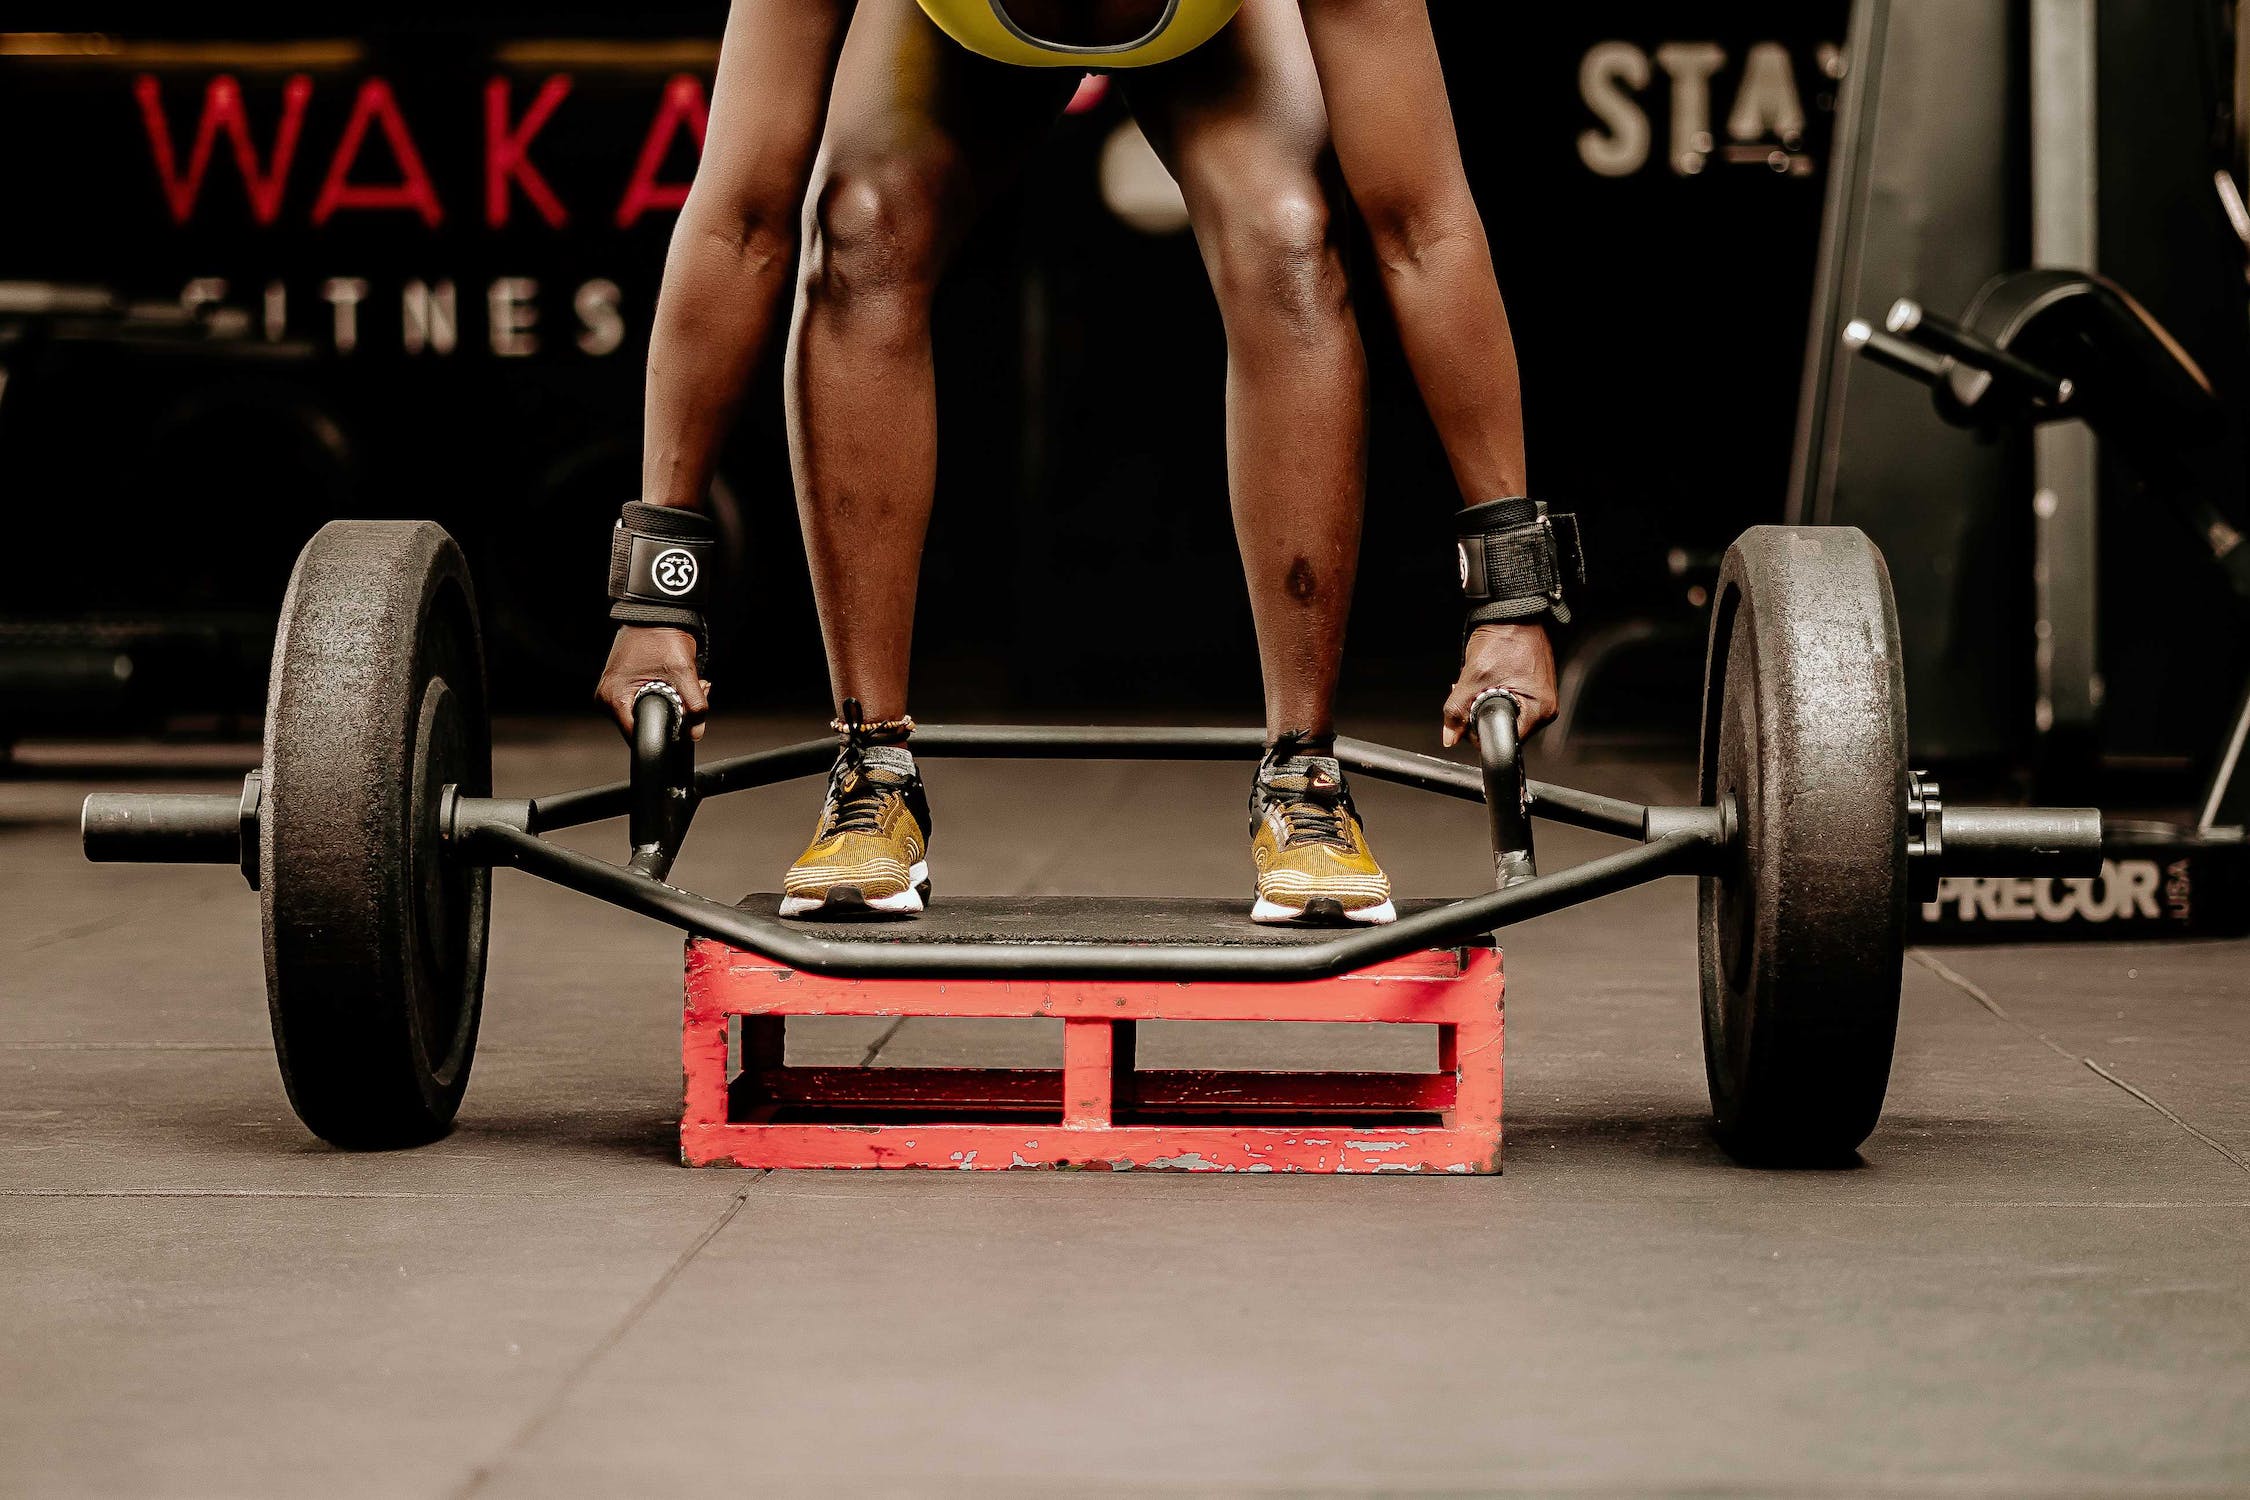 How To Prevent Back Pain When Deadlifting: Tips For Perfect Form